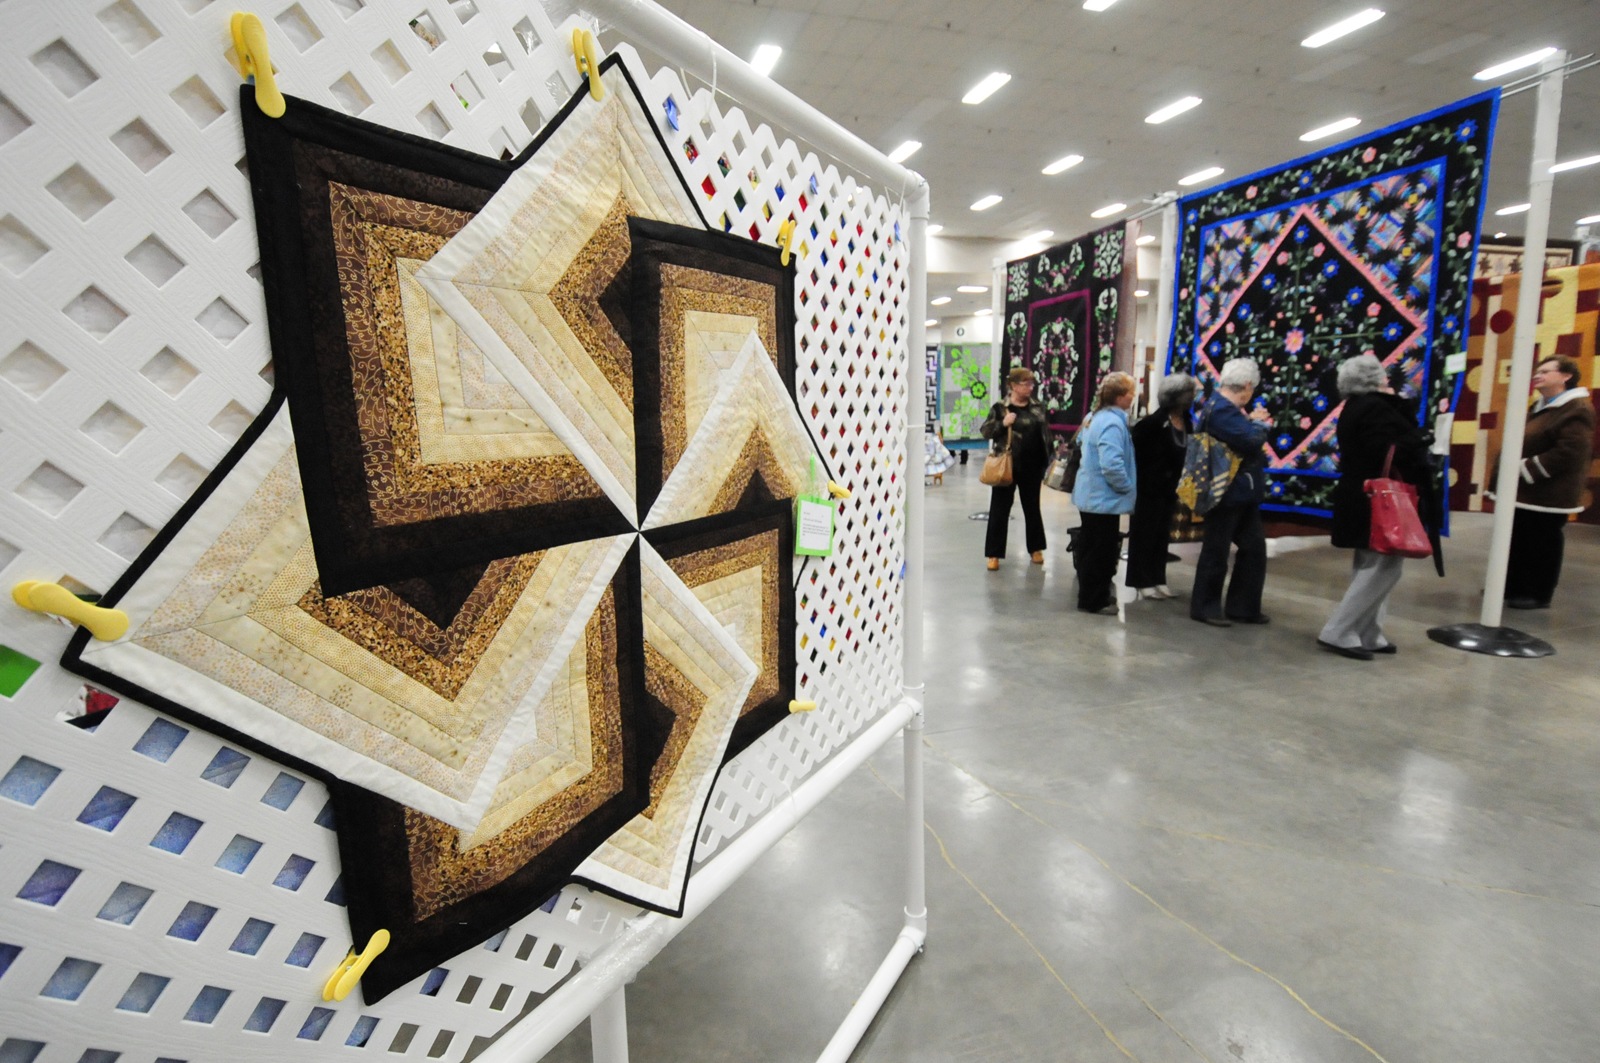 STYLISH-Many quilting enthusiasts brought their creations to a quilt show this past weekend at the Westerner where they were judged and presented ribbons for their work.